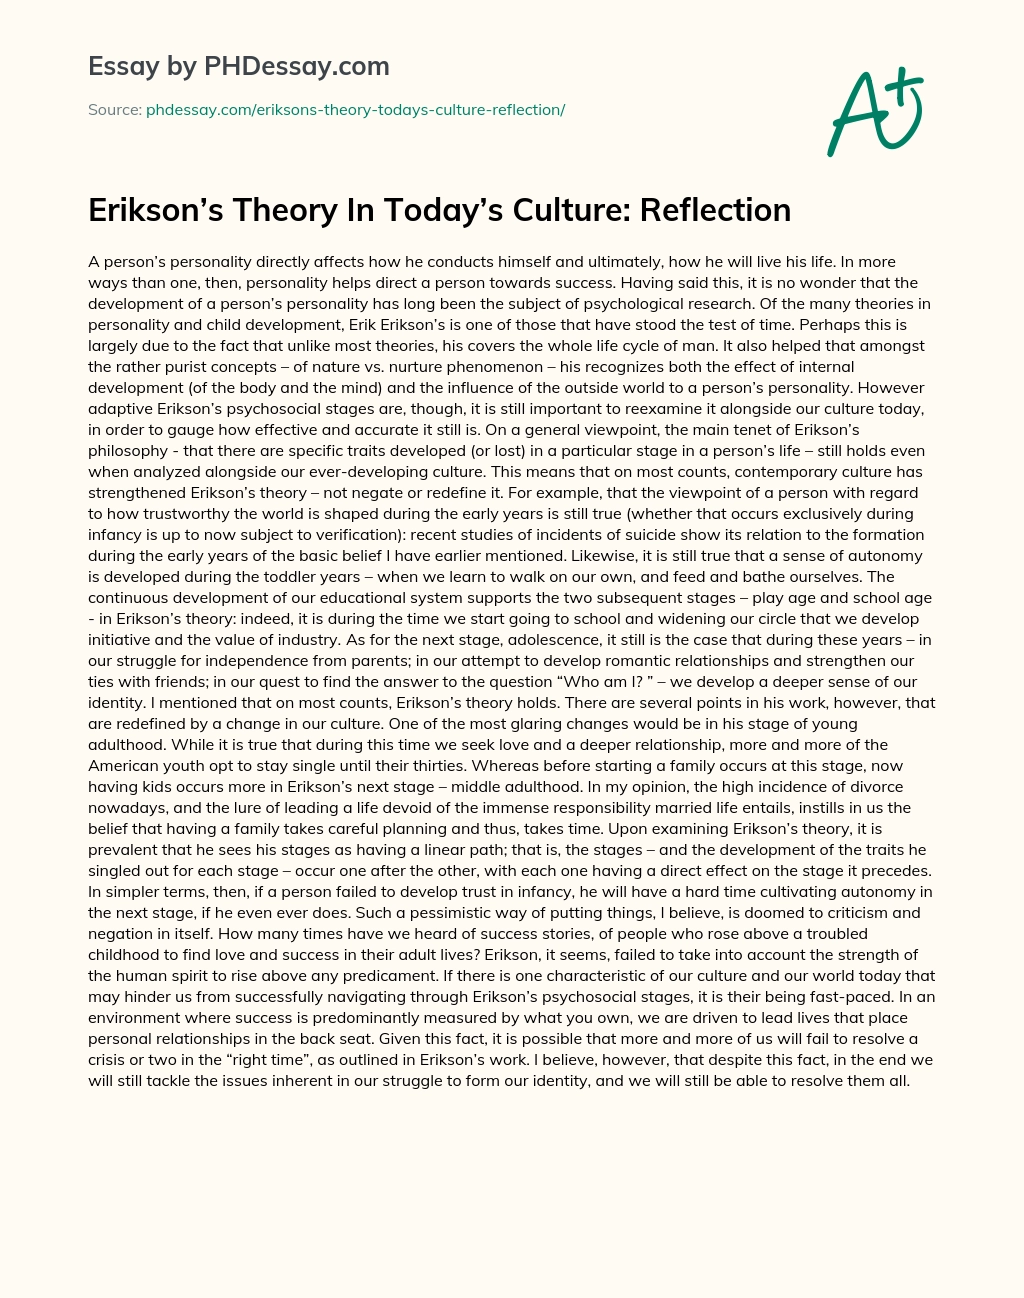 Erikson's Theory In Today's Culture: Reflection essay